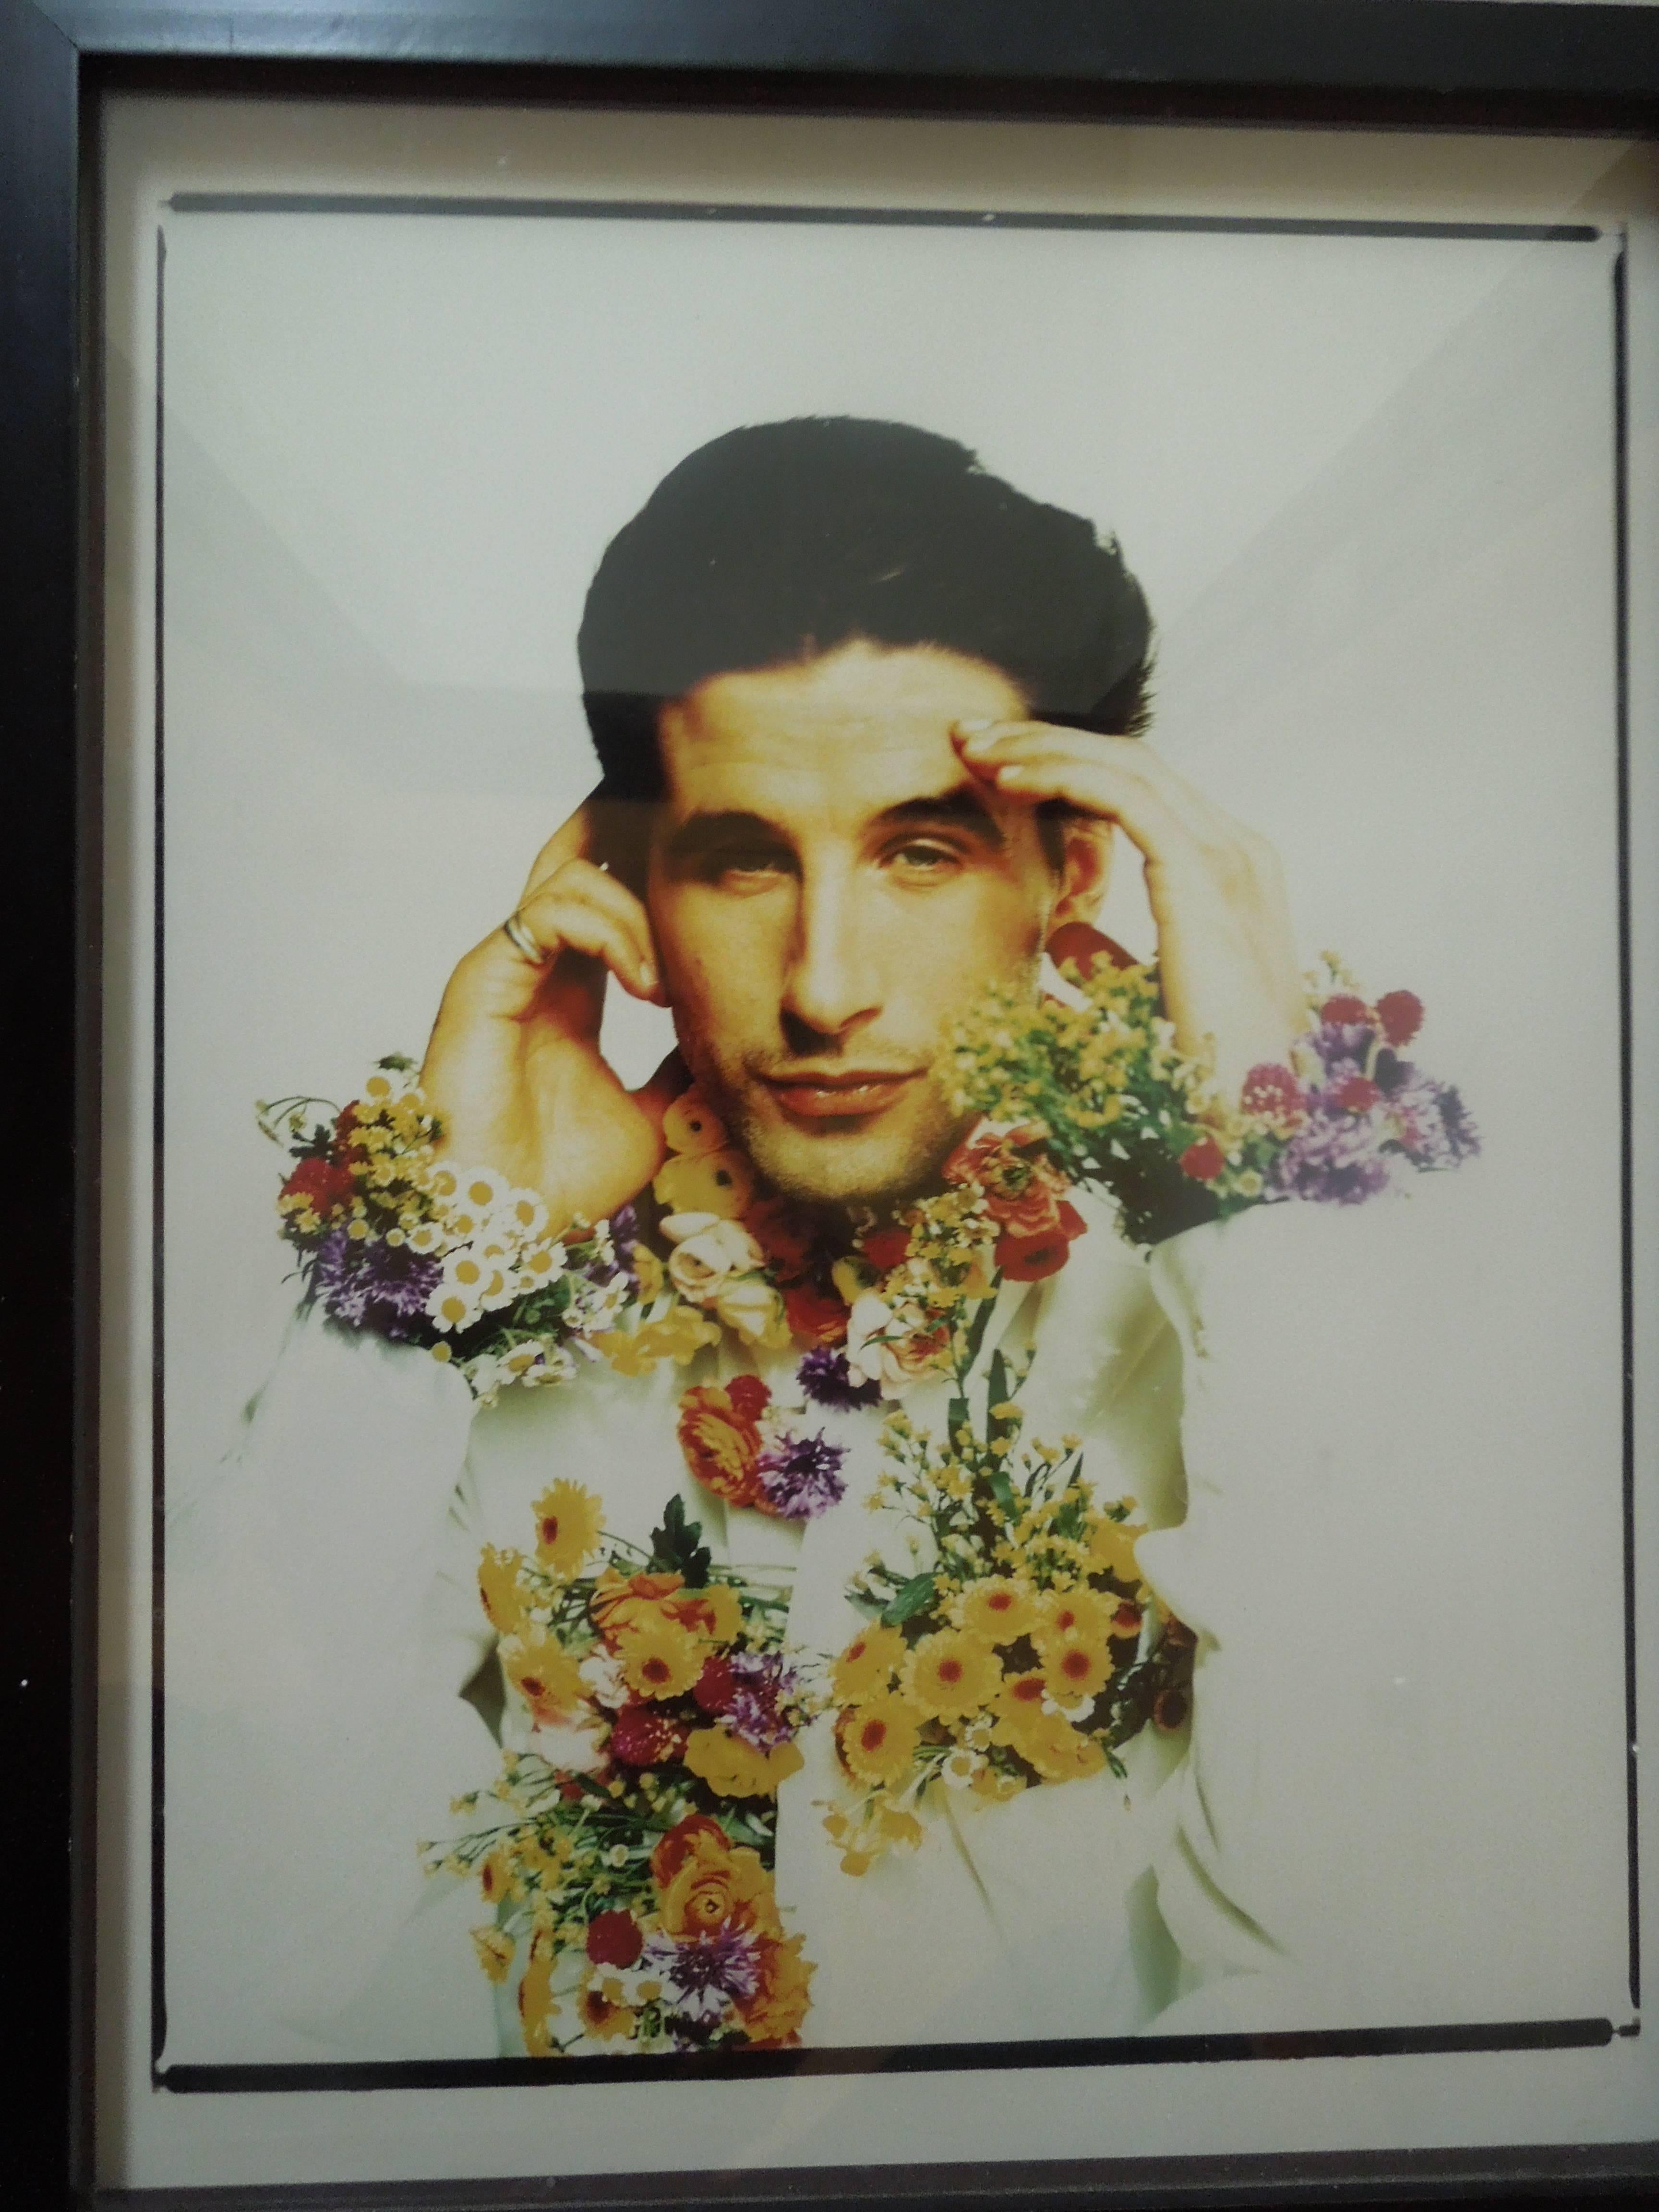 This original color photograph of actor Billy Baldwin by Davis Factor, Los Angeles, CA was used on the cover of LA Style Magazine in 1997. From a Los Angels Celebrity Auction for APLA. Framed: 12'' x 15''. A beautiful photograph of a beautiful man